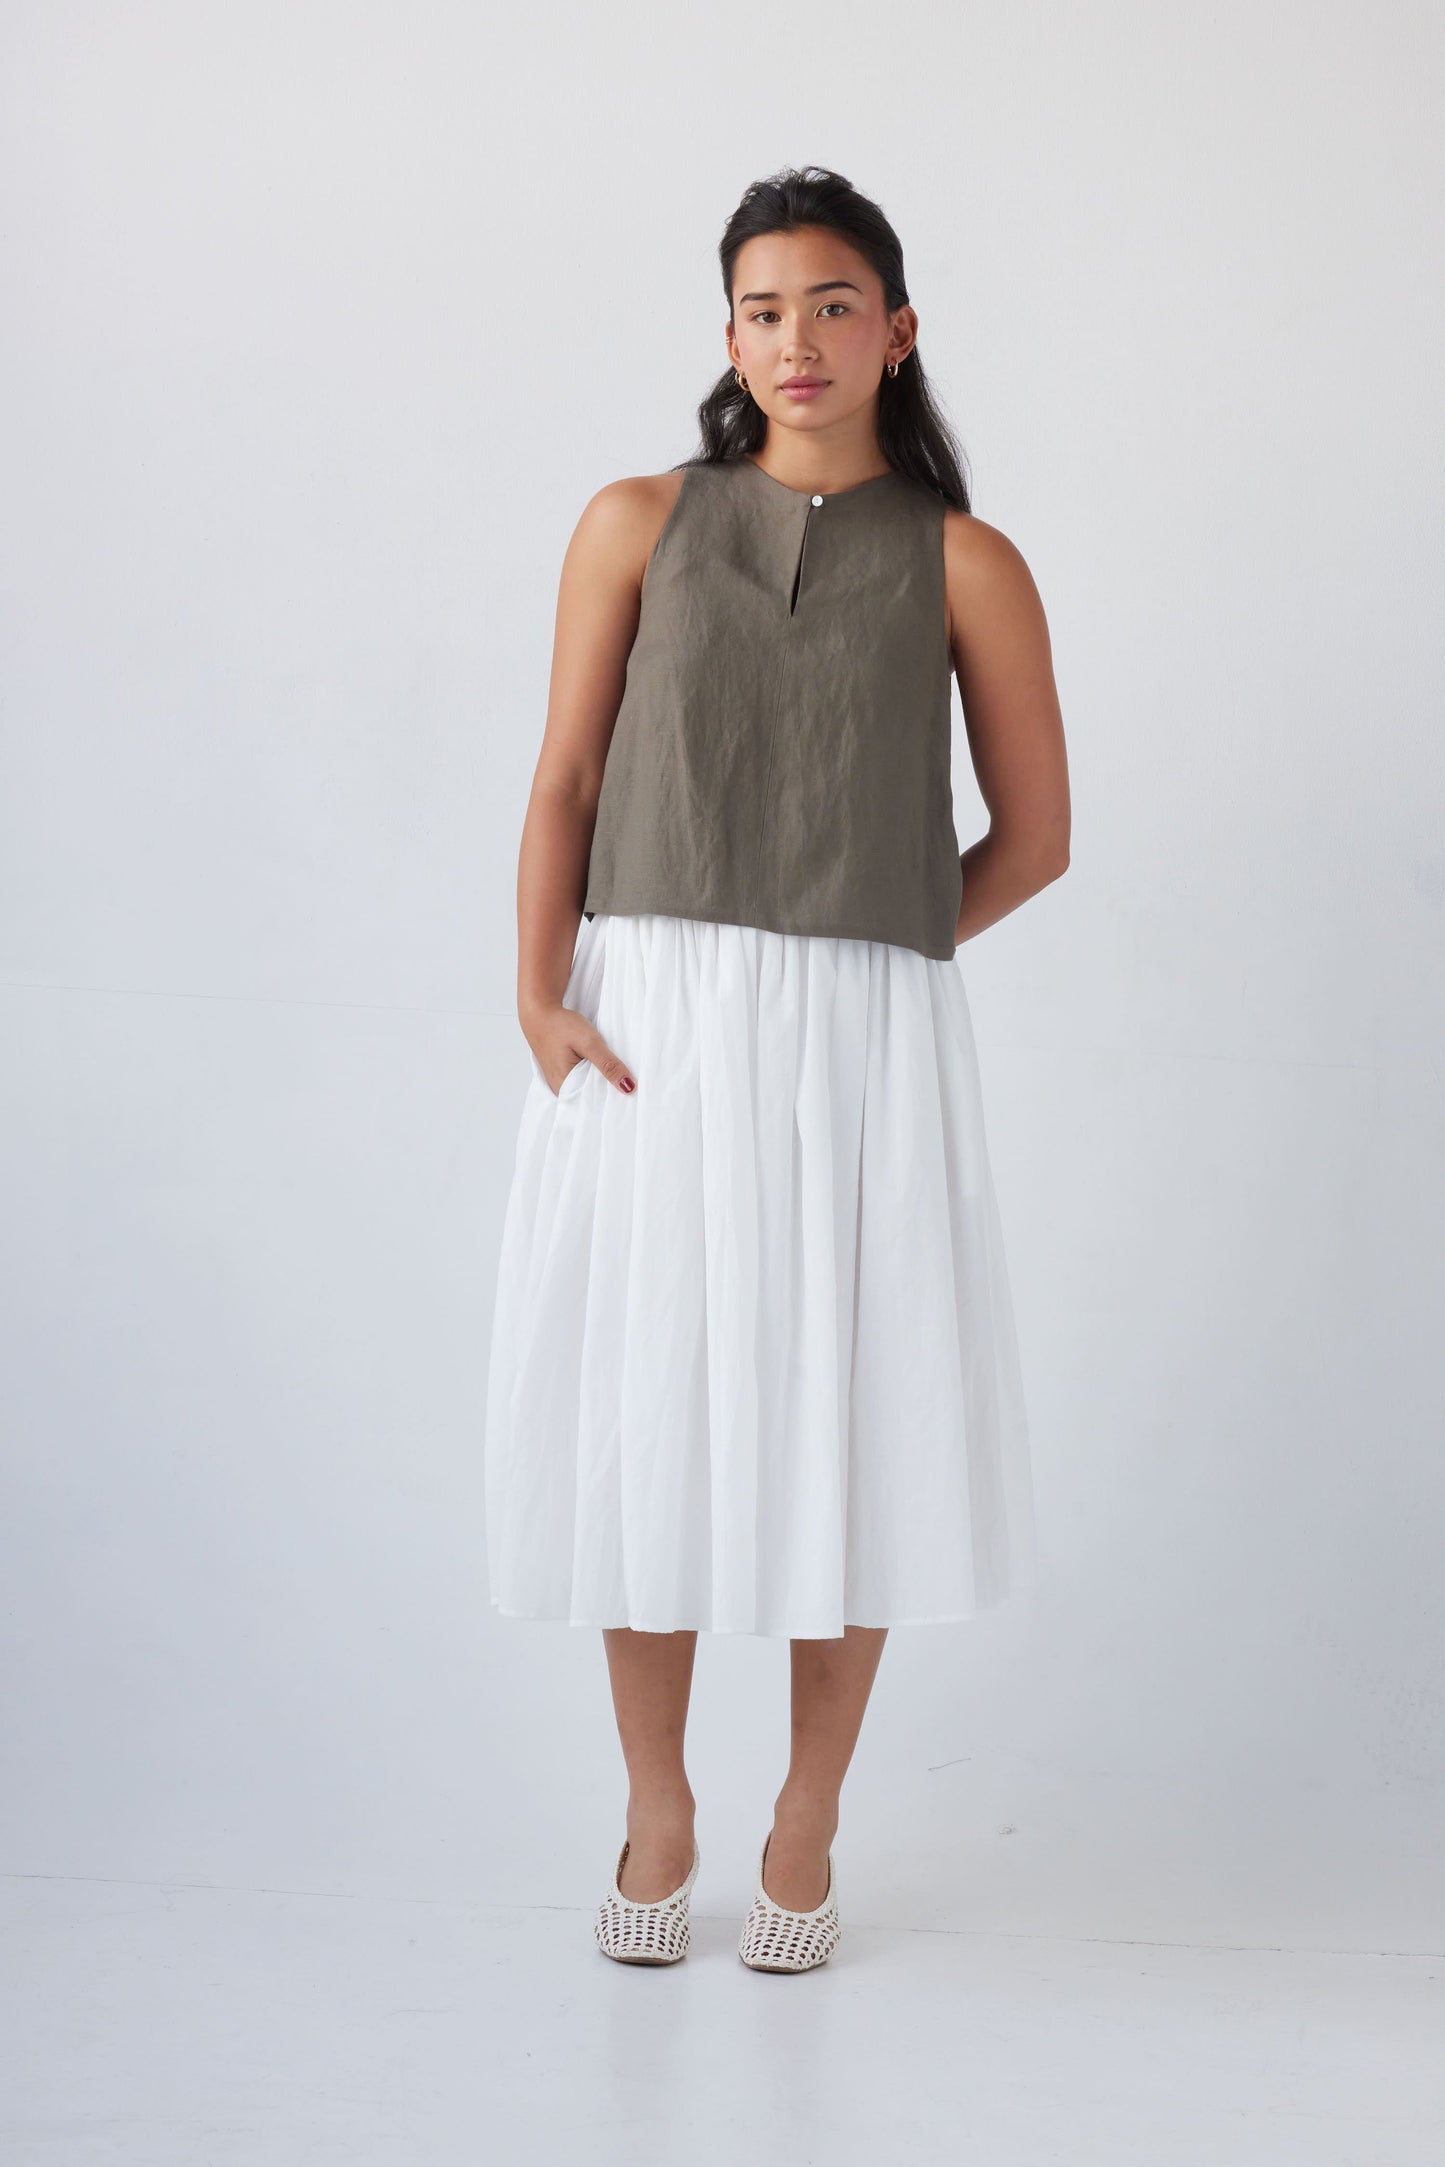 Ina Tank in Linen Blend Tops CHRISTINE ALCALAY Olive Extra Small 